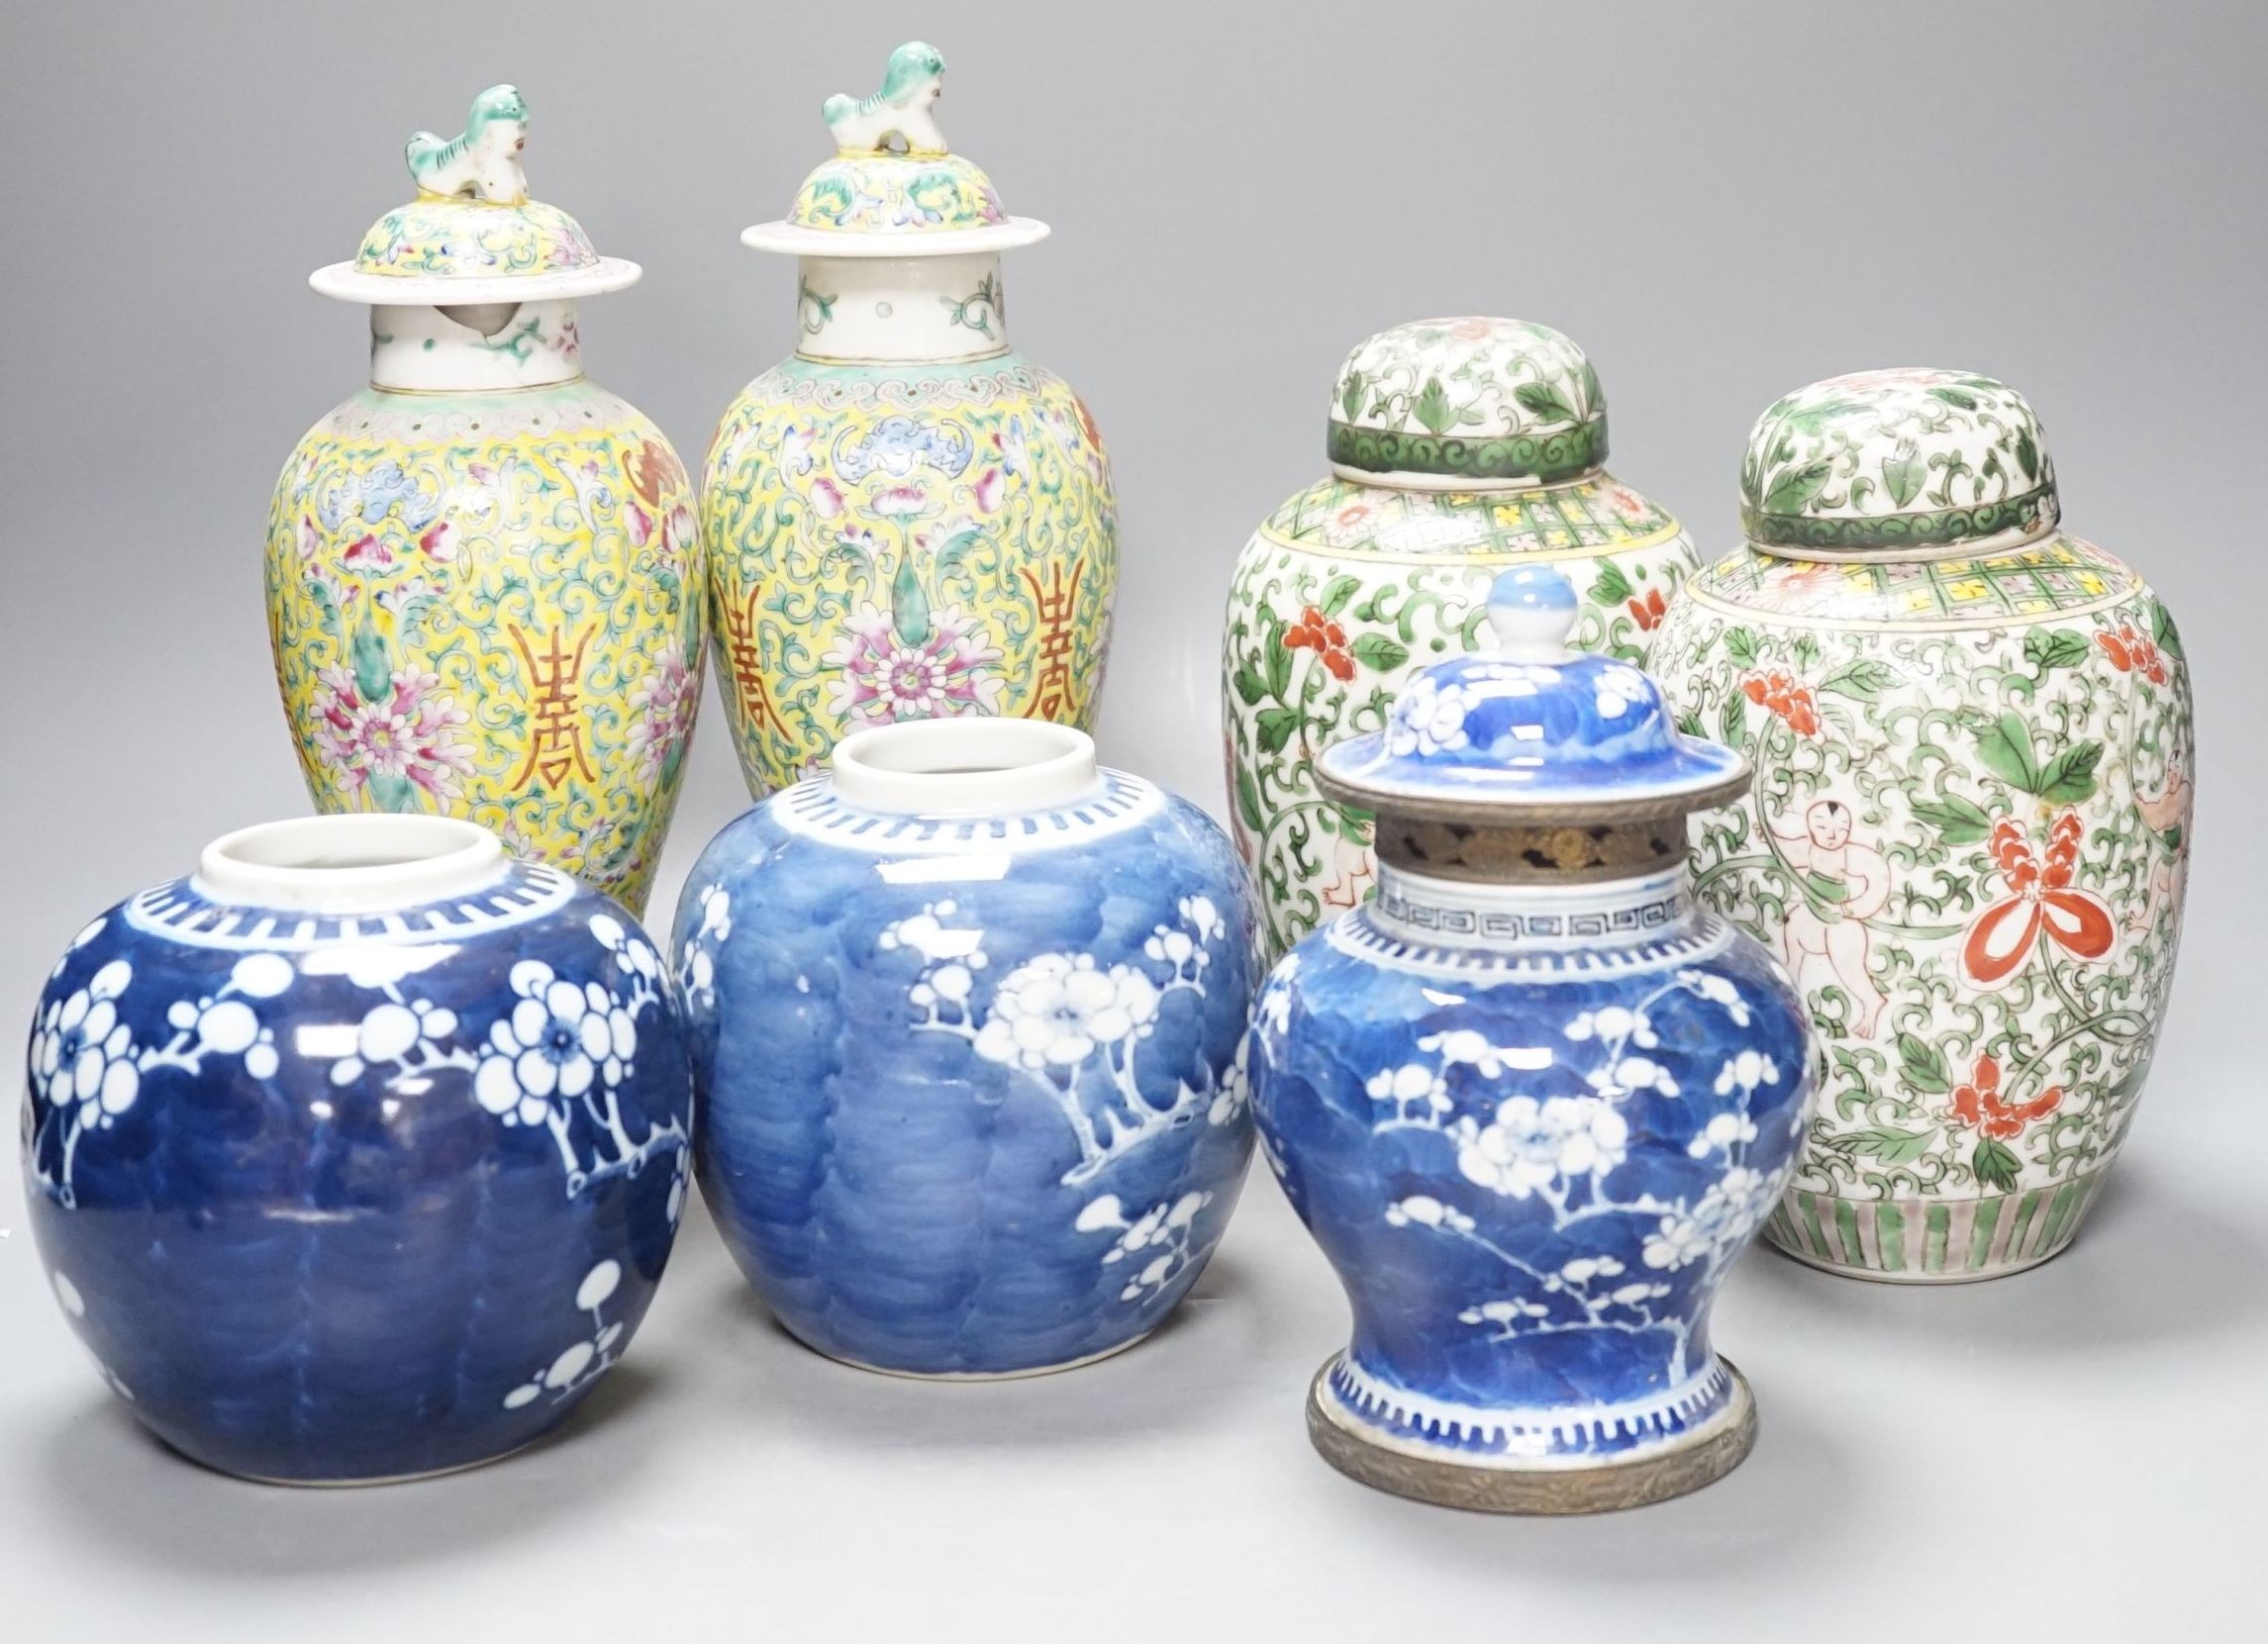 A pair of Chinese porcelain vases and covers, a pair of jars and covers, a metal mounted vase and cover and two prunus jars, (7), Tallest vases 26.5 cms high including cover.